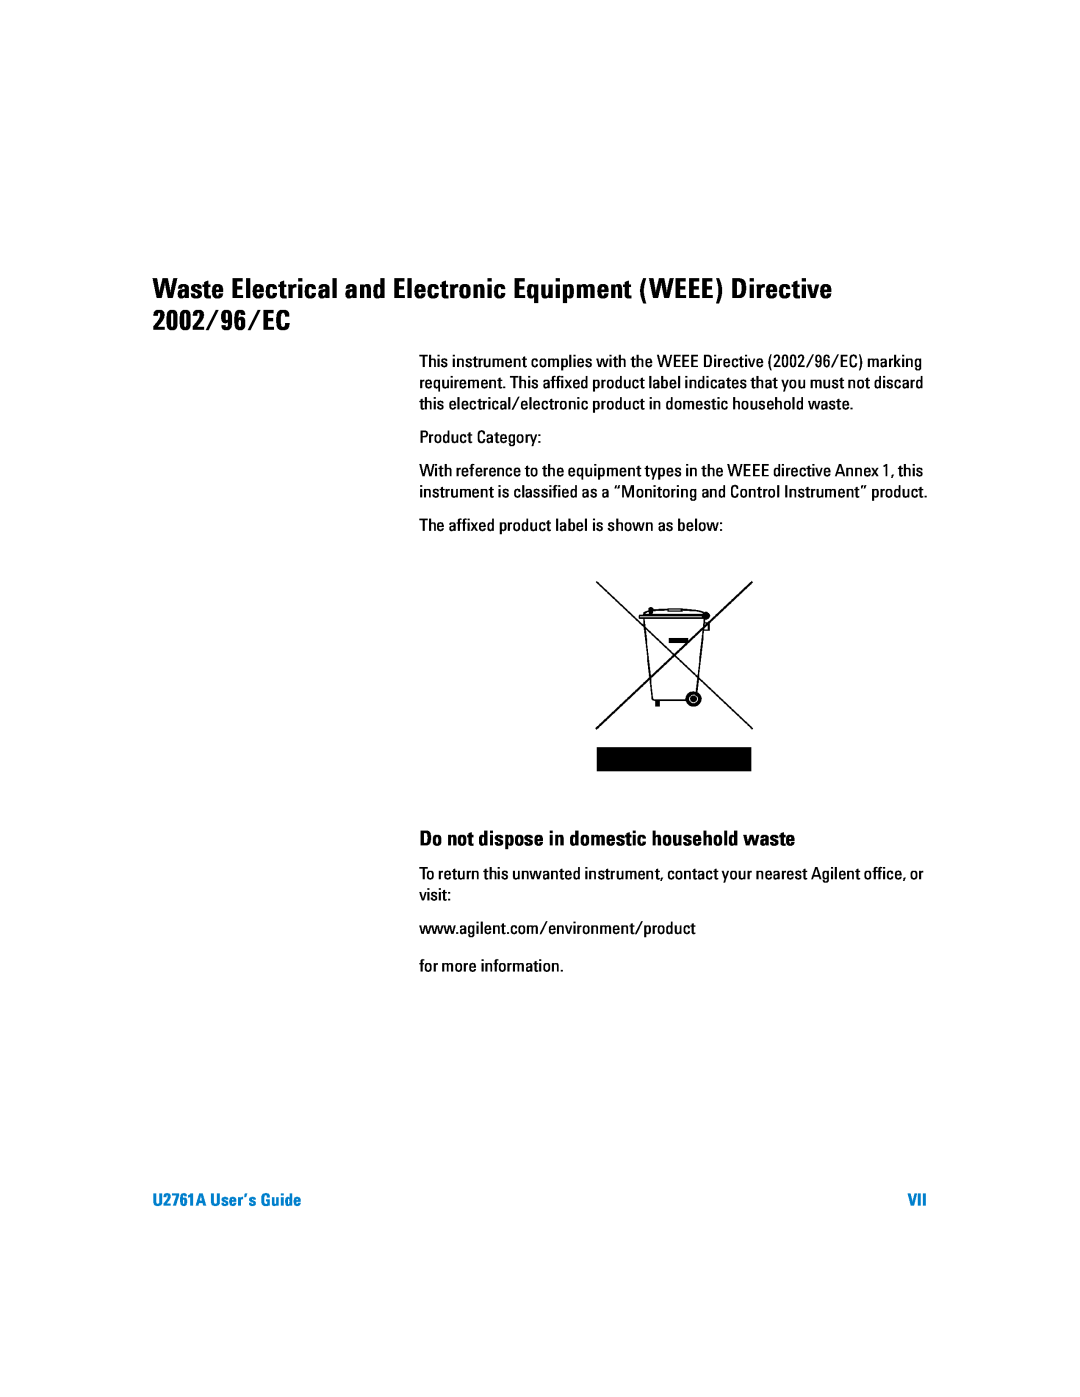 Agilent Technologies manual Waste Electrical and Electronic Equipment WEEE Directive 2002/96/EC, U2761A User’s Guide 